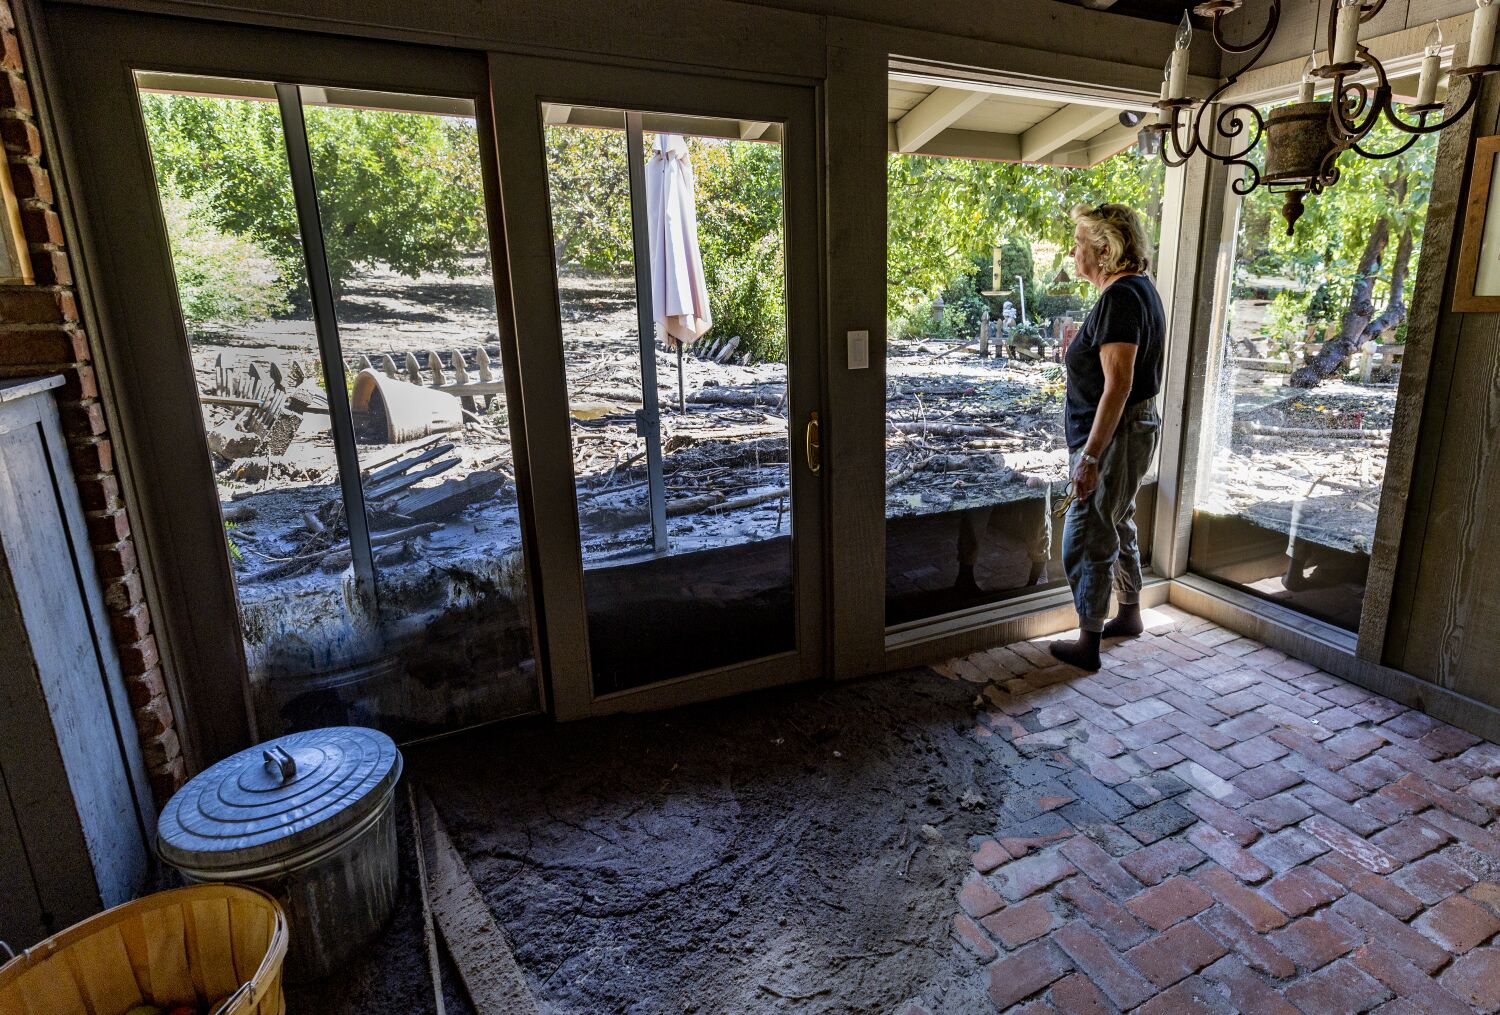 In San Bernardino mountains, residents hit by devastating mudslide fear more to come